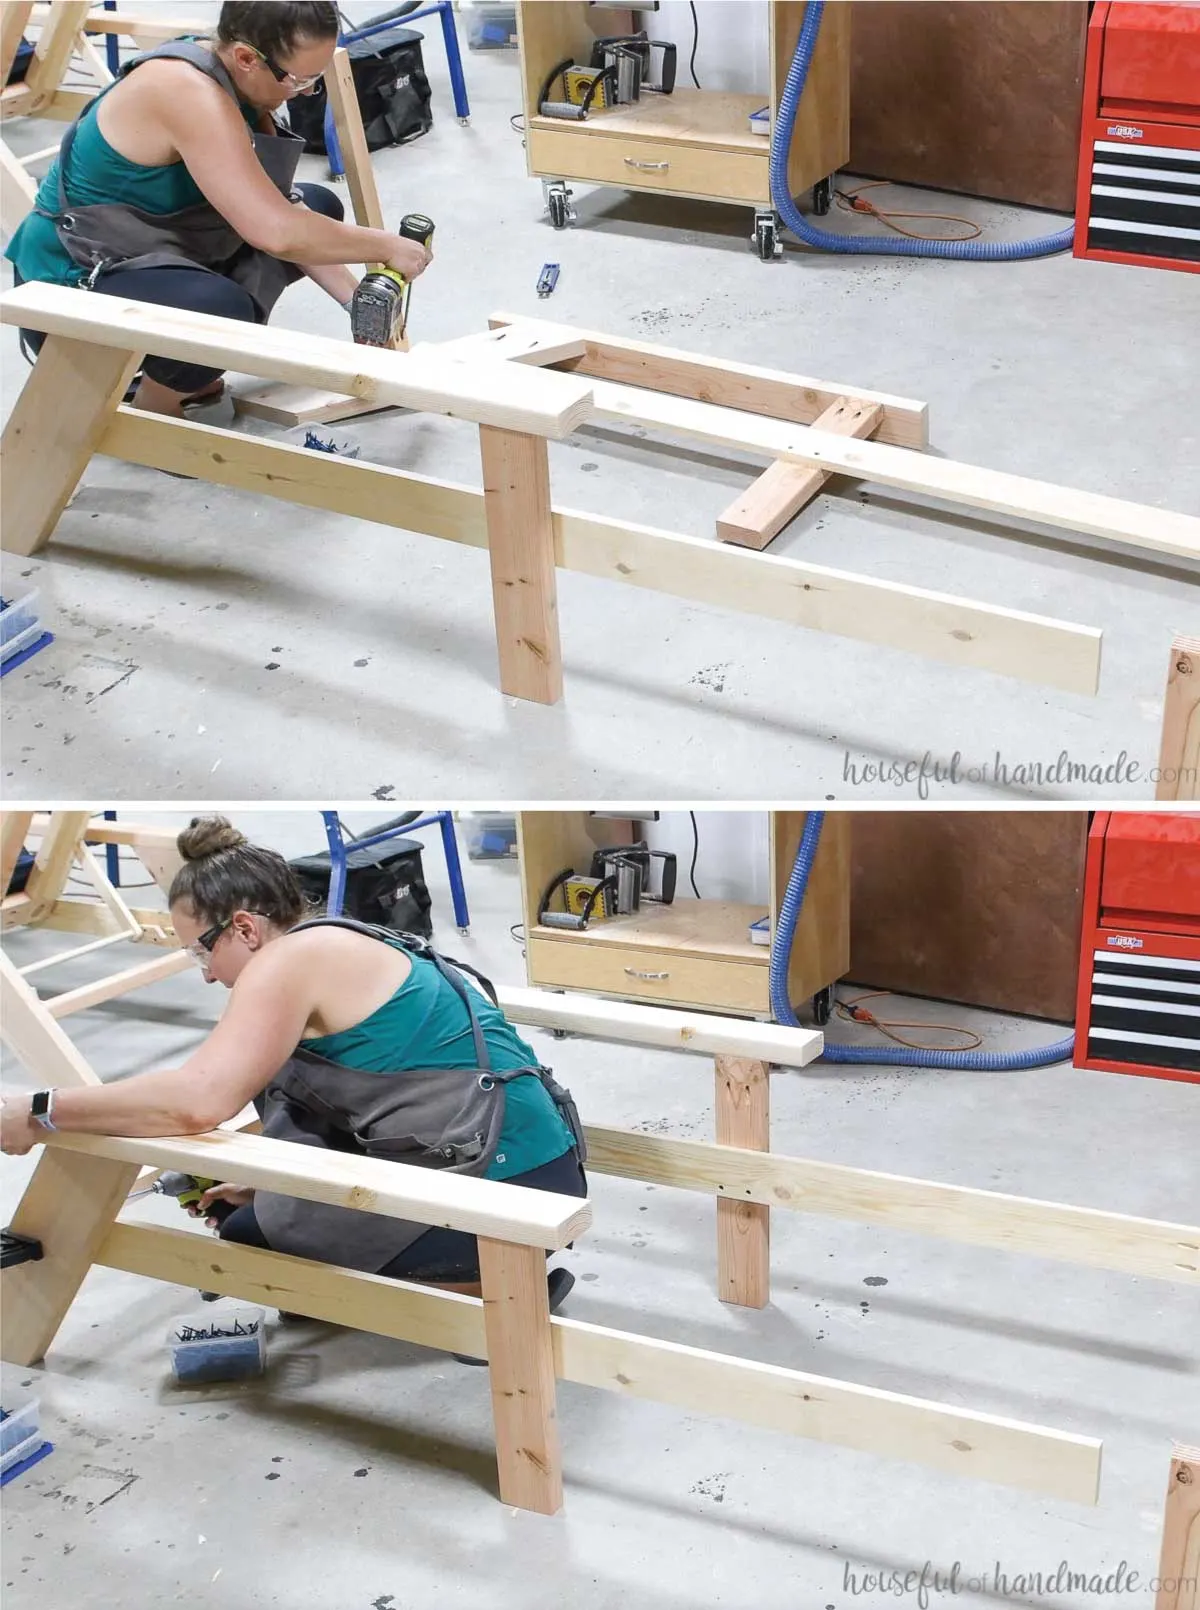 Attaching the two sides of the chaise lounge chair together with a 2x2 at the back of the rails.